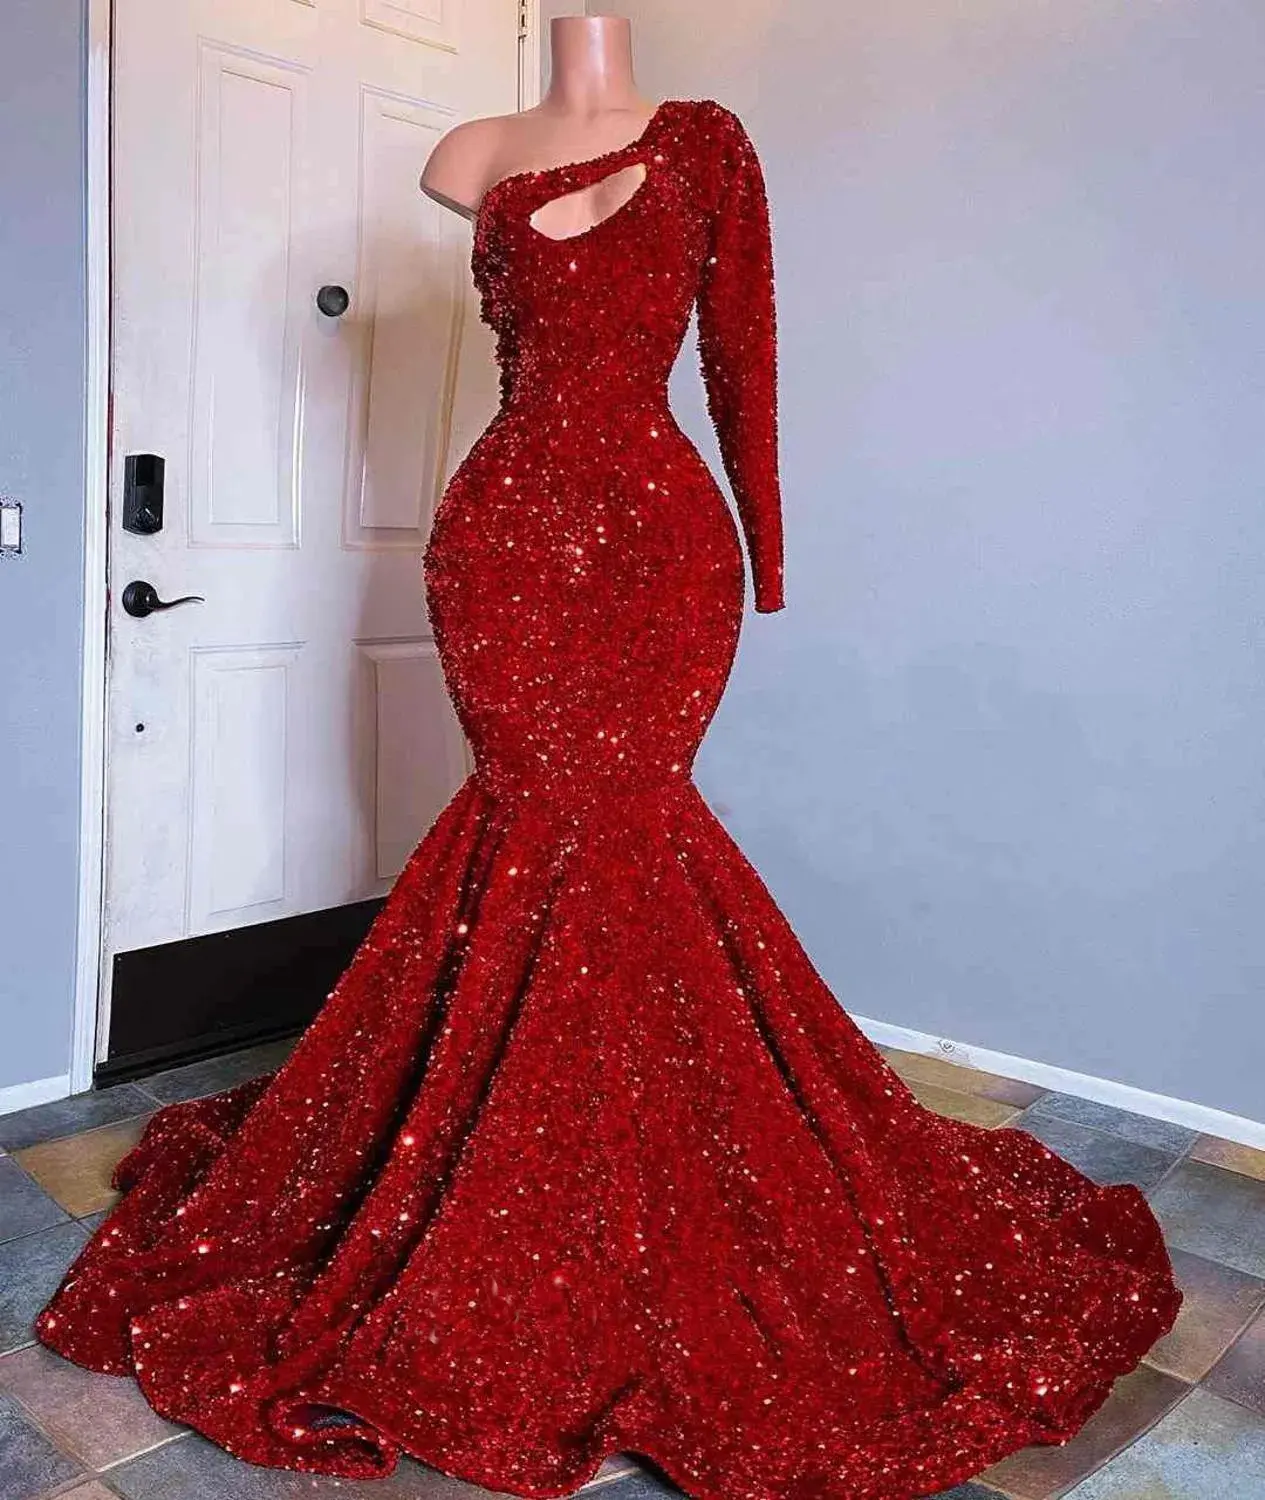 Ocstrade Custom Bodycon Cut Out Bodice Red Evening Gown Dress Elegant Sparkly Red Sequin One Shoulder Sleeve Prom Dress 2023